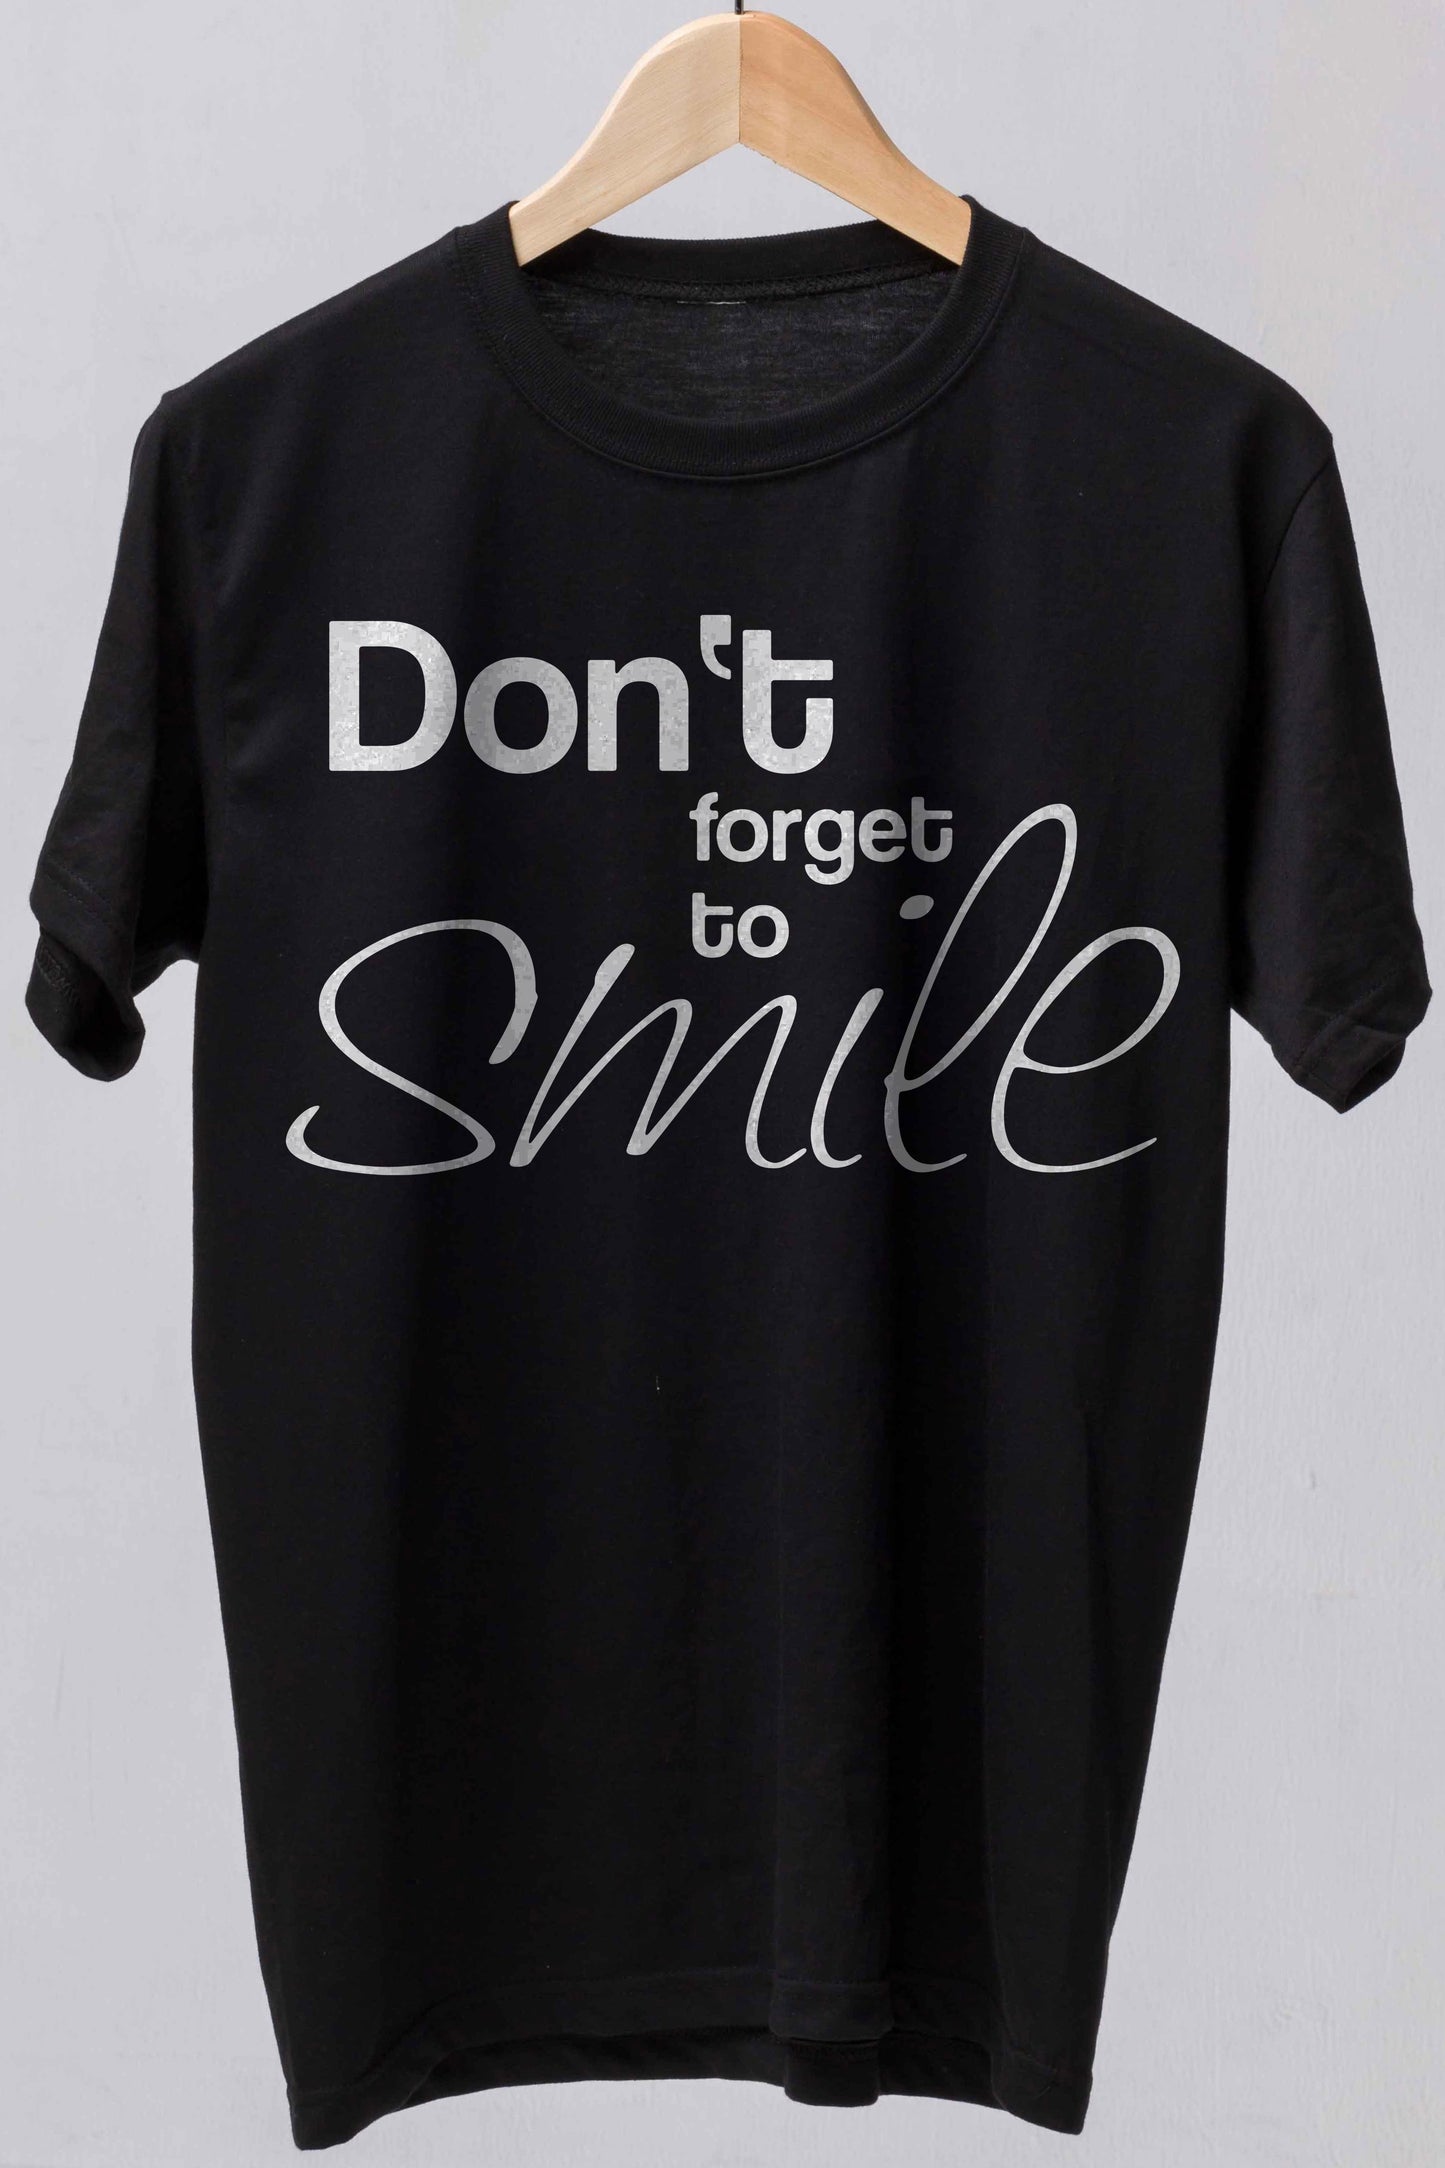 DON'T FORGET TO SMILE FUNNY & HAPPY T-SHIRT - The Official Dealers